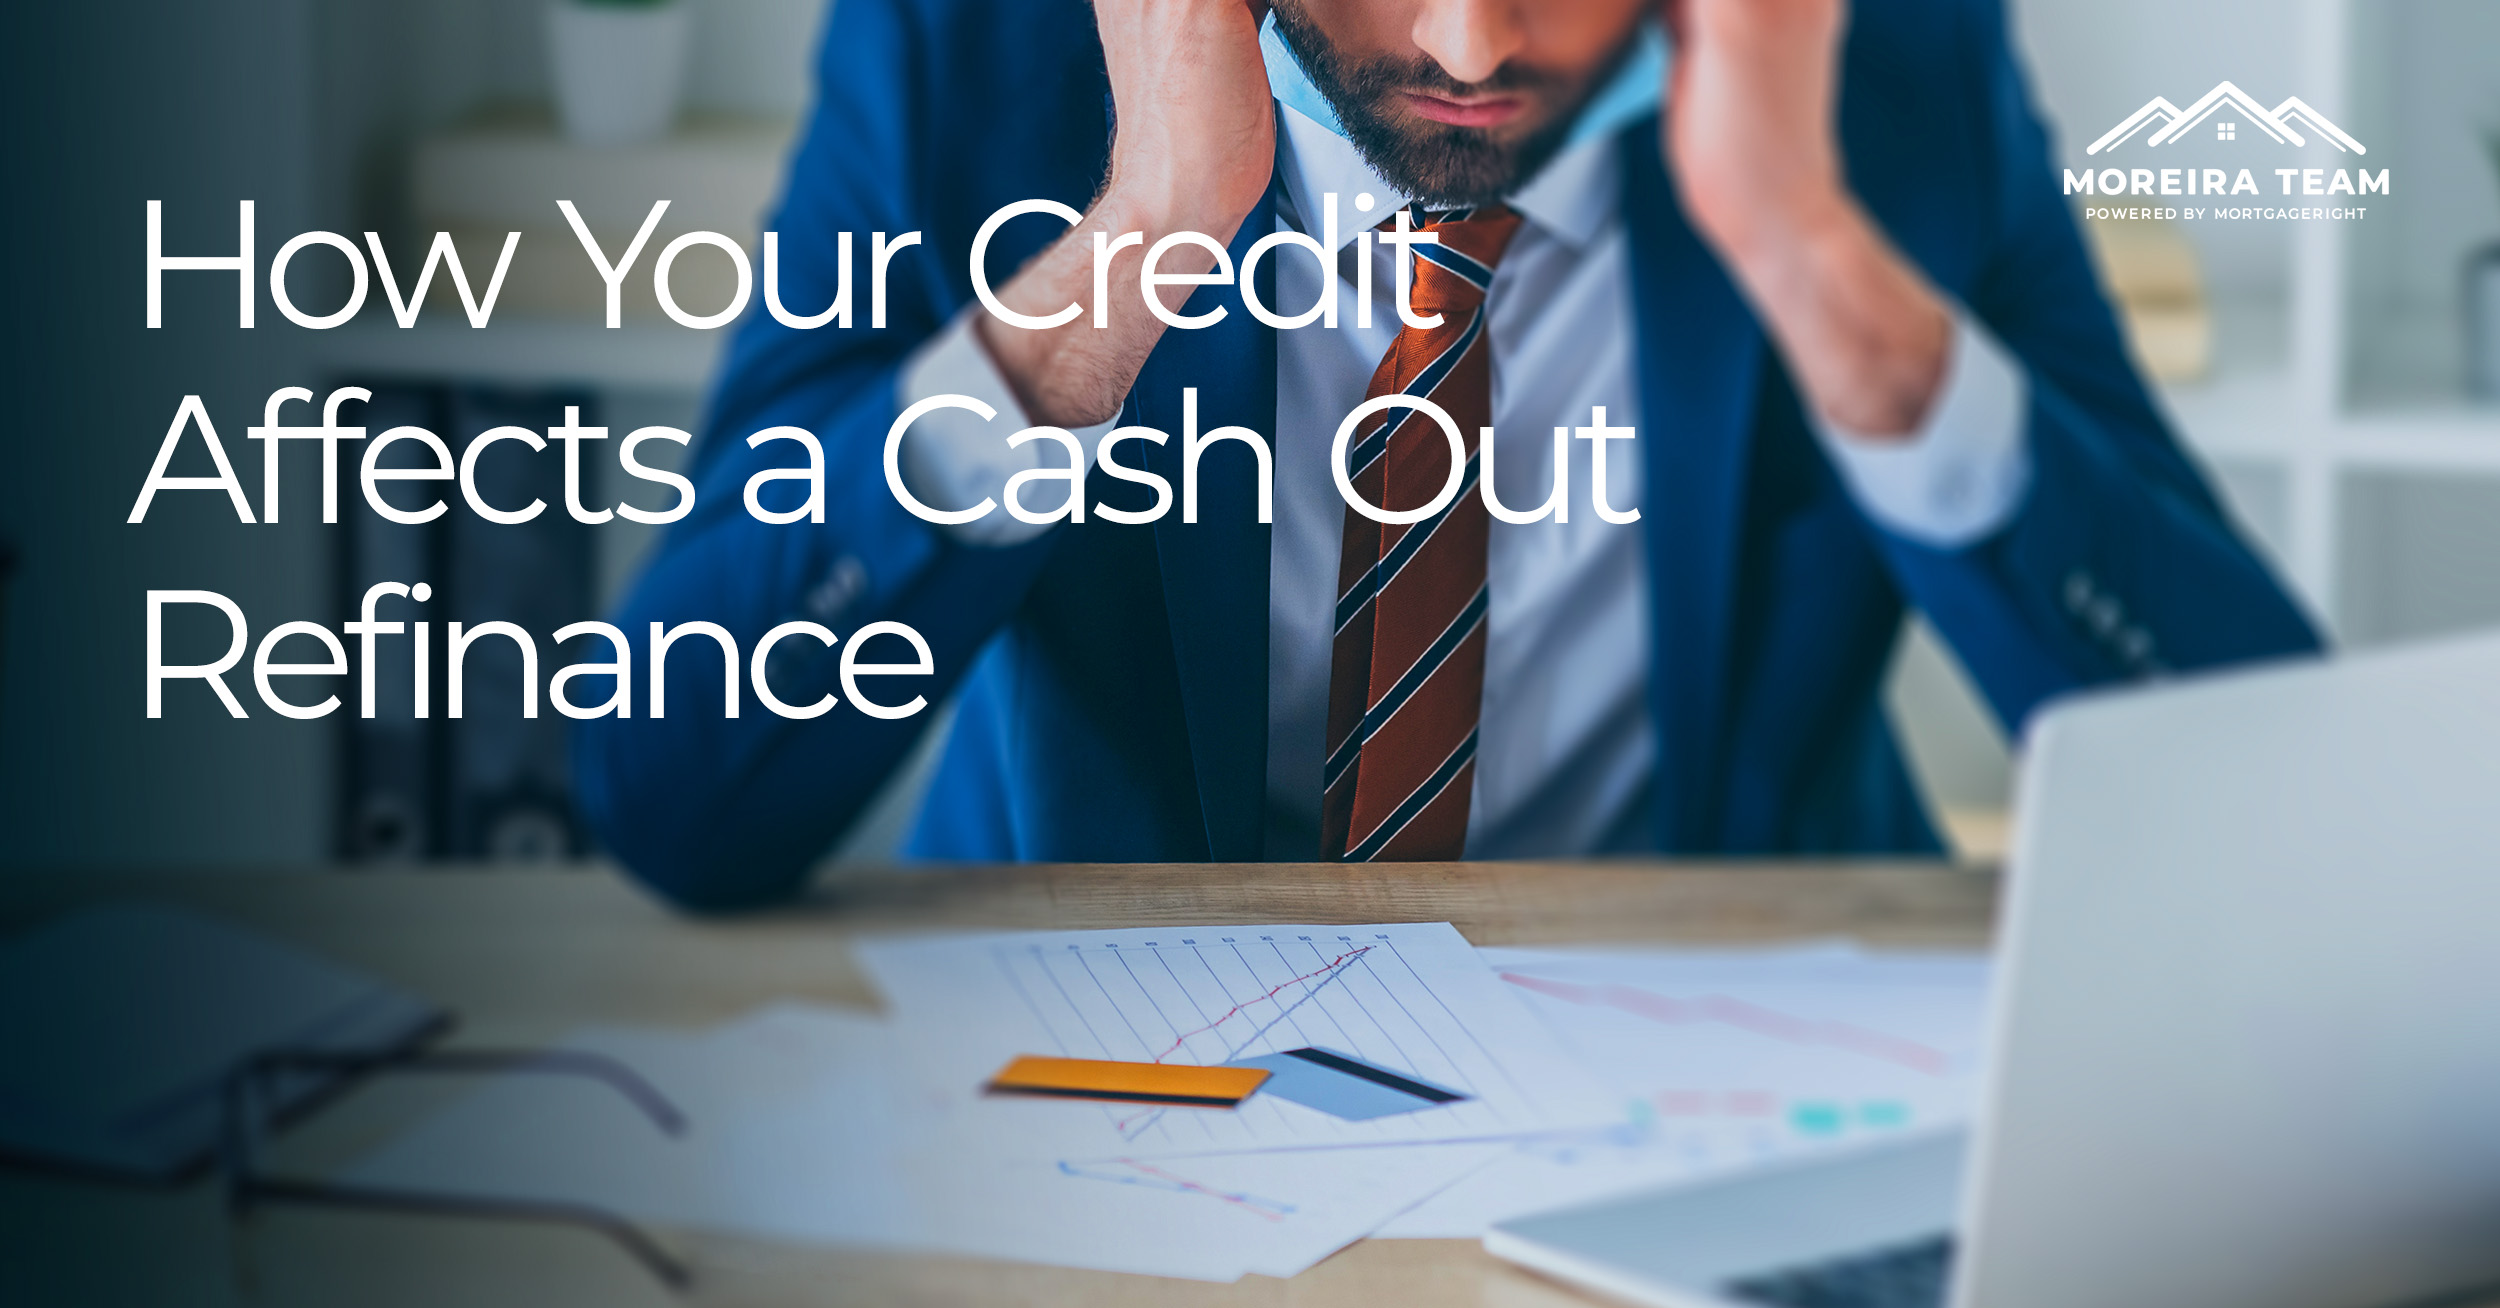 How Your Credit Score Affects Your Chances of Getting a Cash Out Refinance